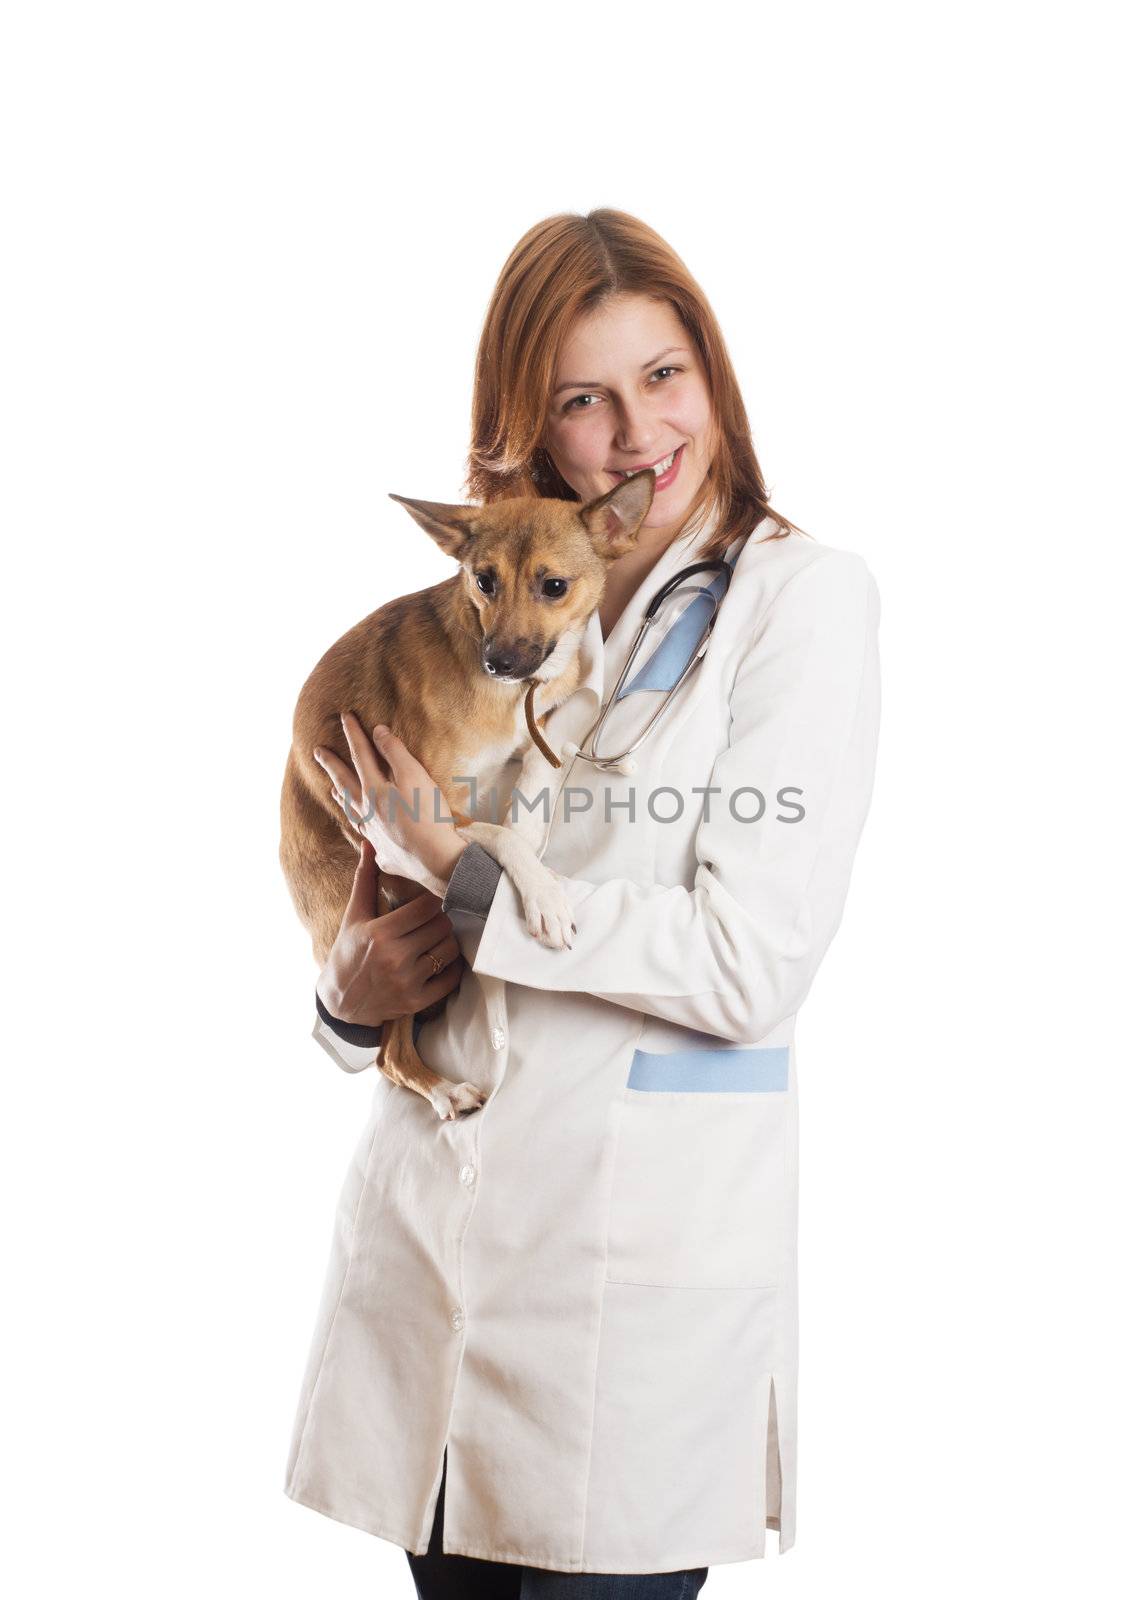 young woman veterinarian holding a puppy by gurin_oleksandr